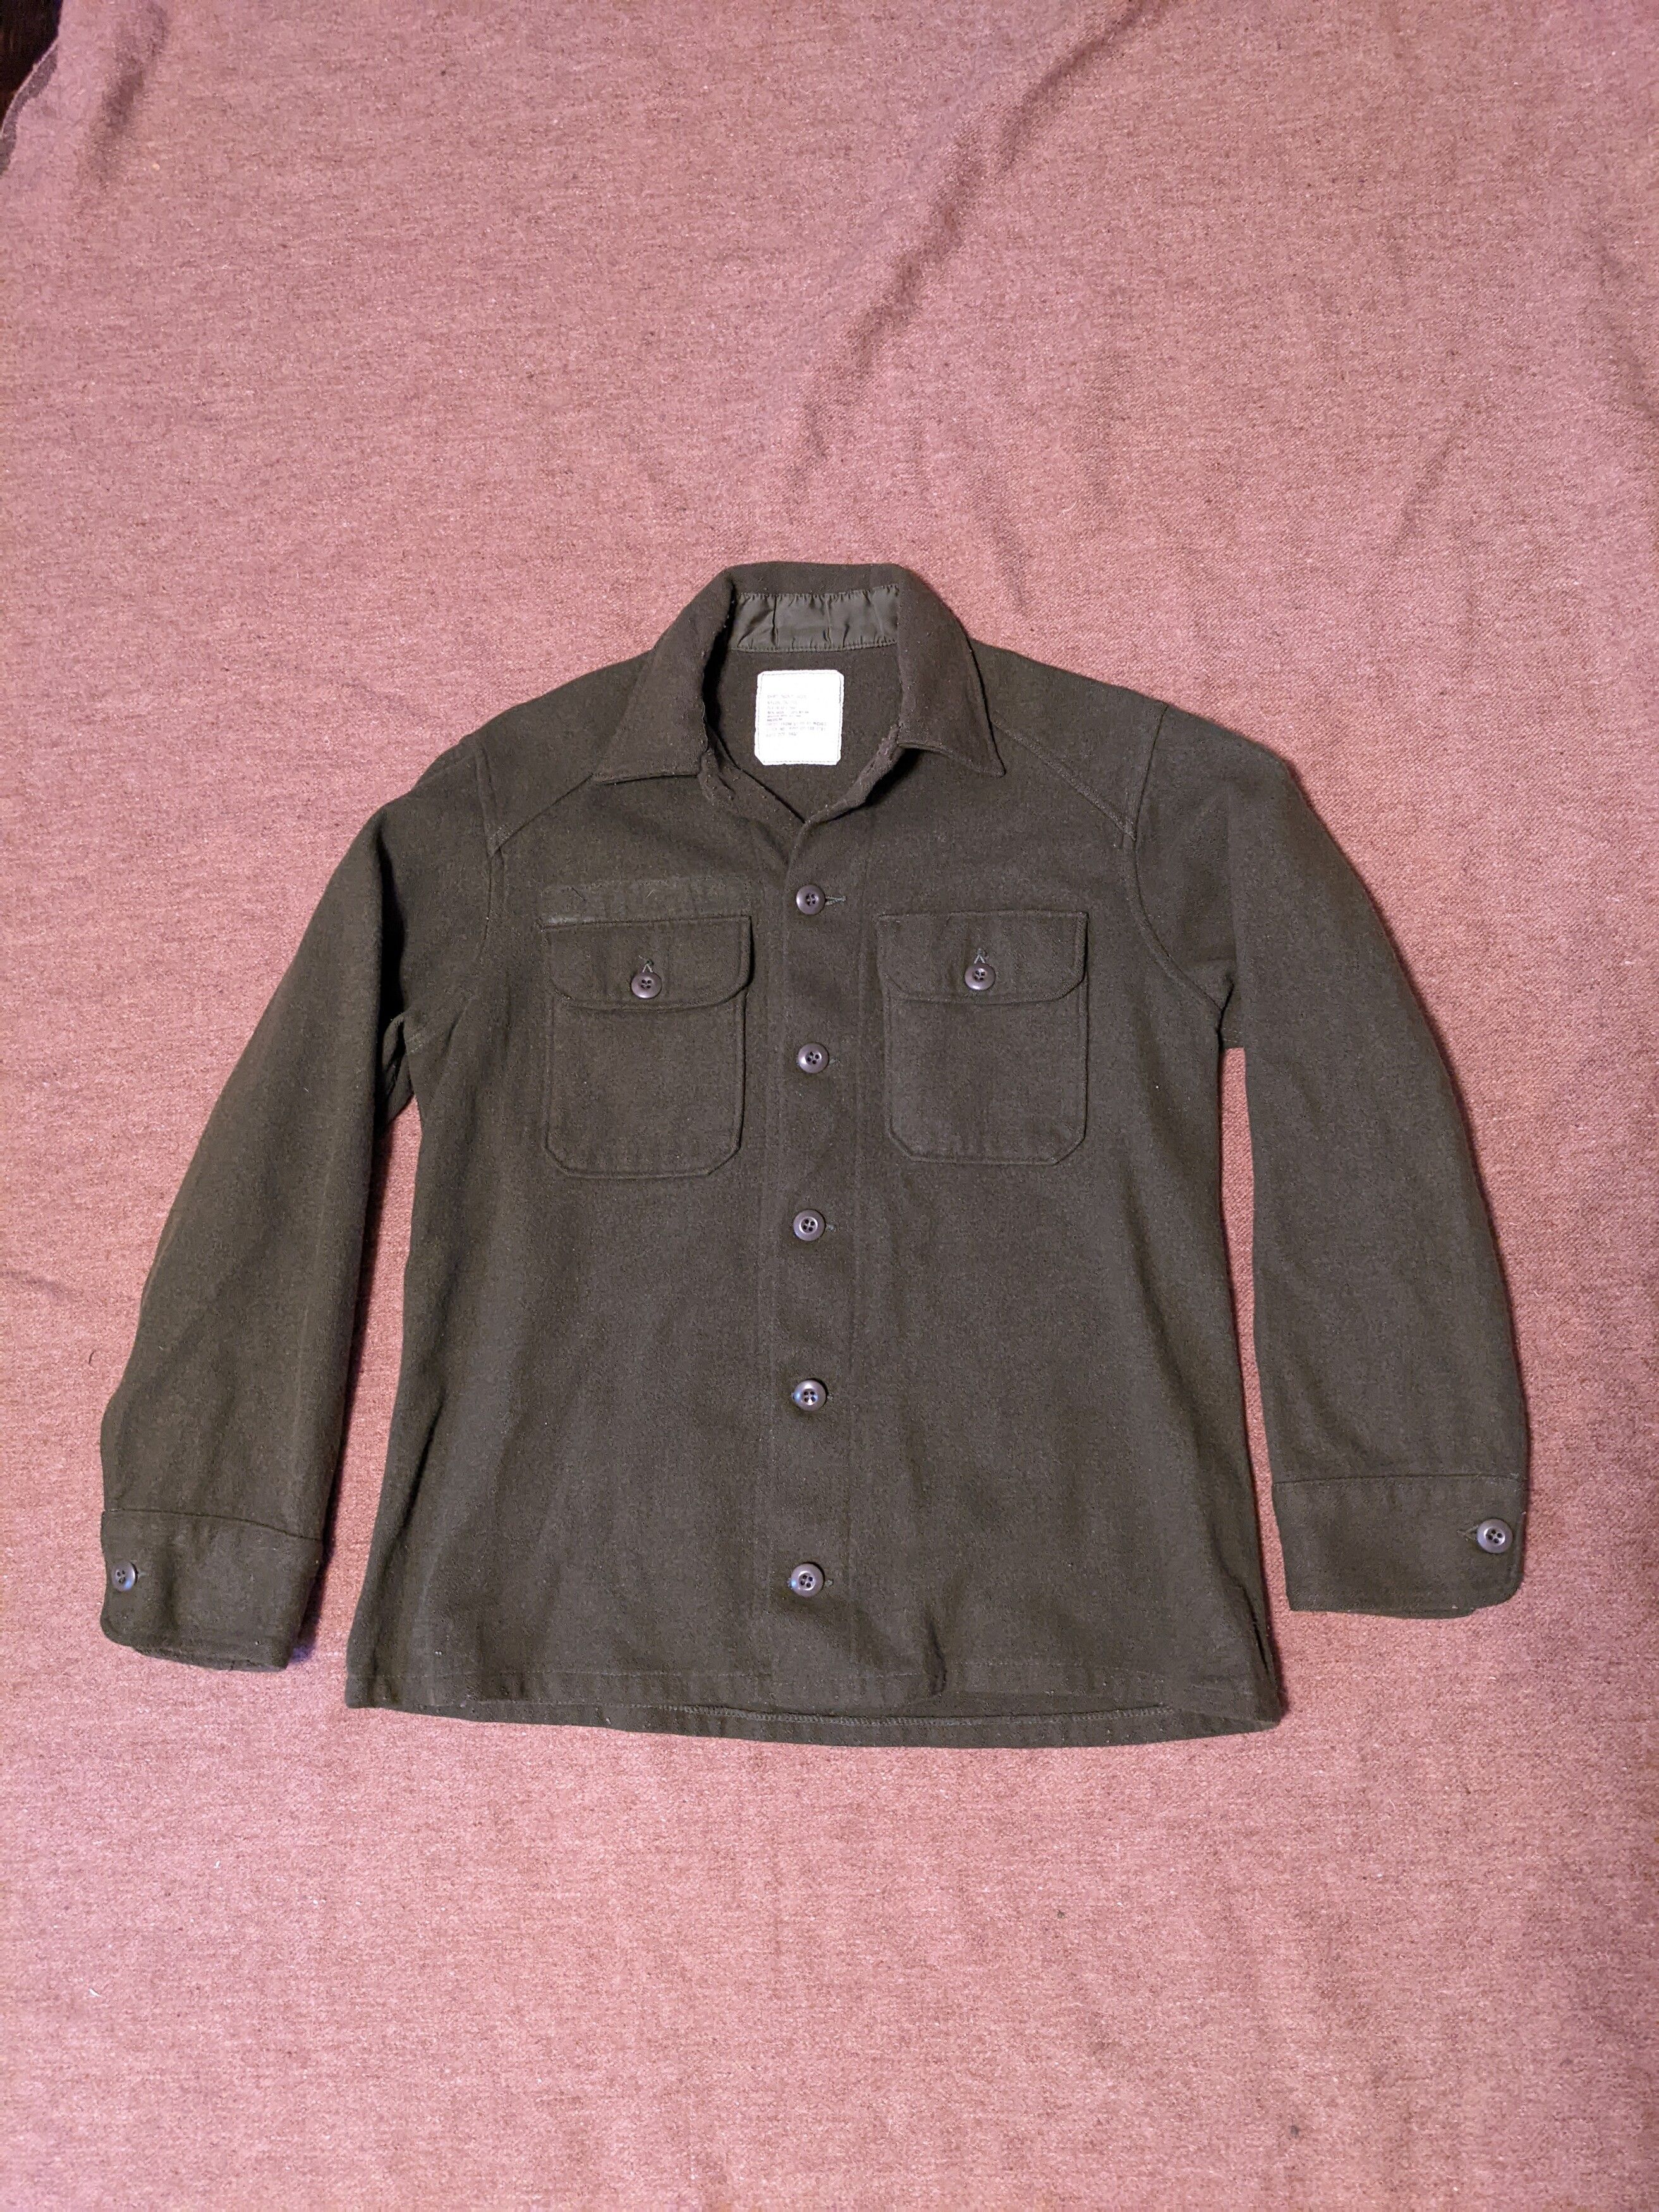 Military VINTAGE 1950's US Military Men's Wool Blend Field Shirt Size US M / EU 48-50 / 2 - 1 Preview